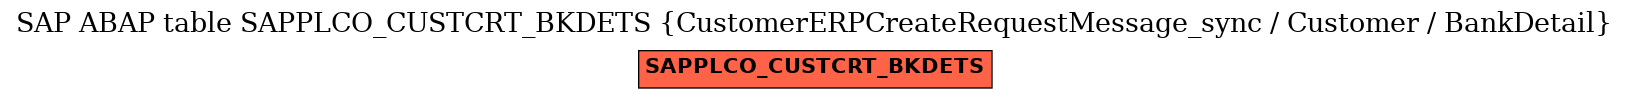 E-R Diagram for table SAPPLCO_CUSTCRT_BKDETS (CustomerERPCreateRequestMessage_sync / Customer / BankDetail)